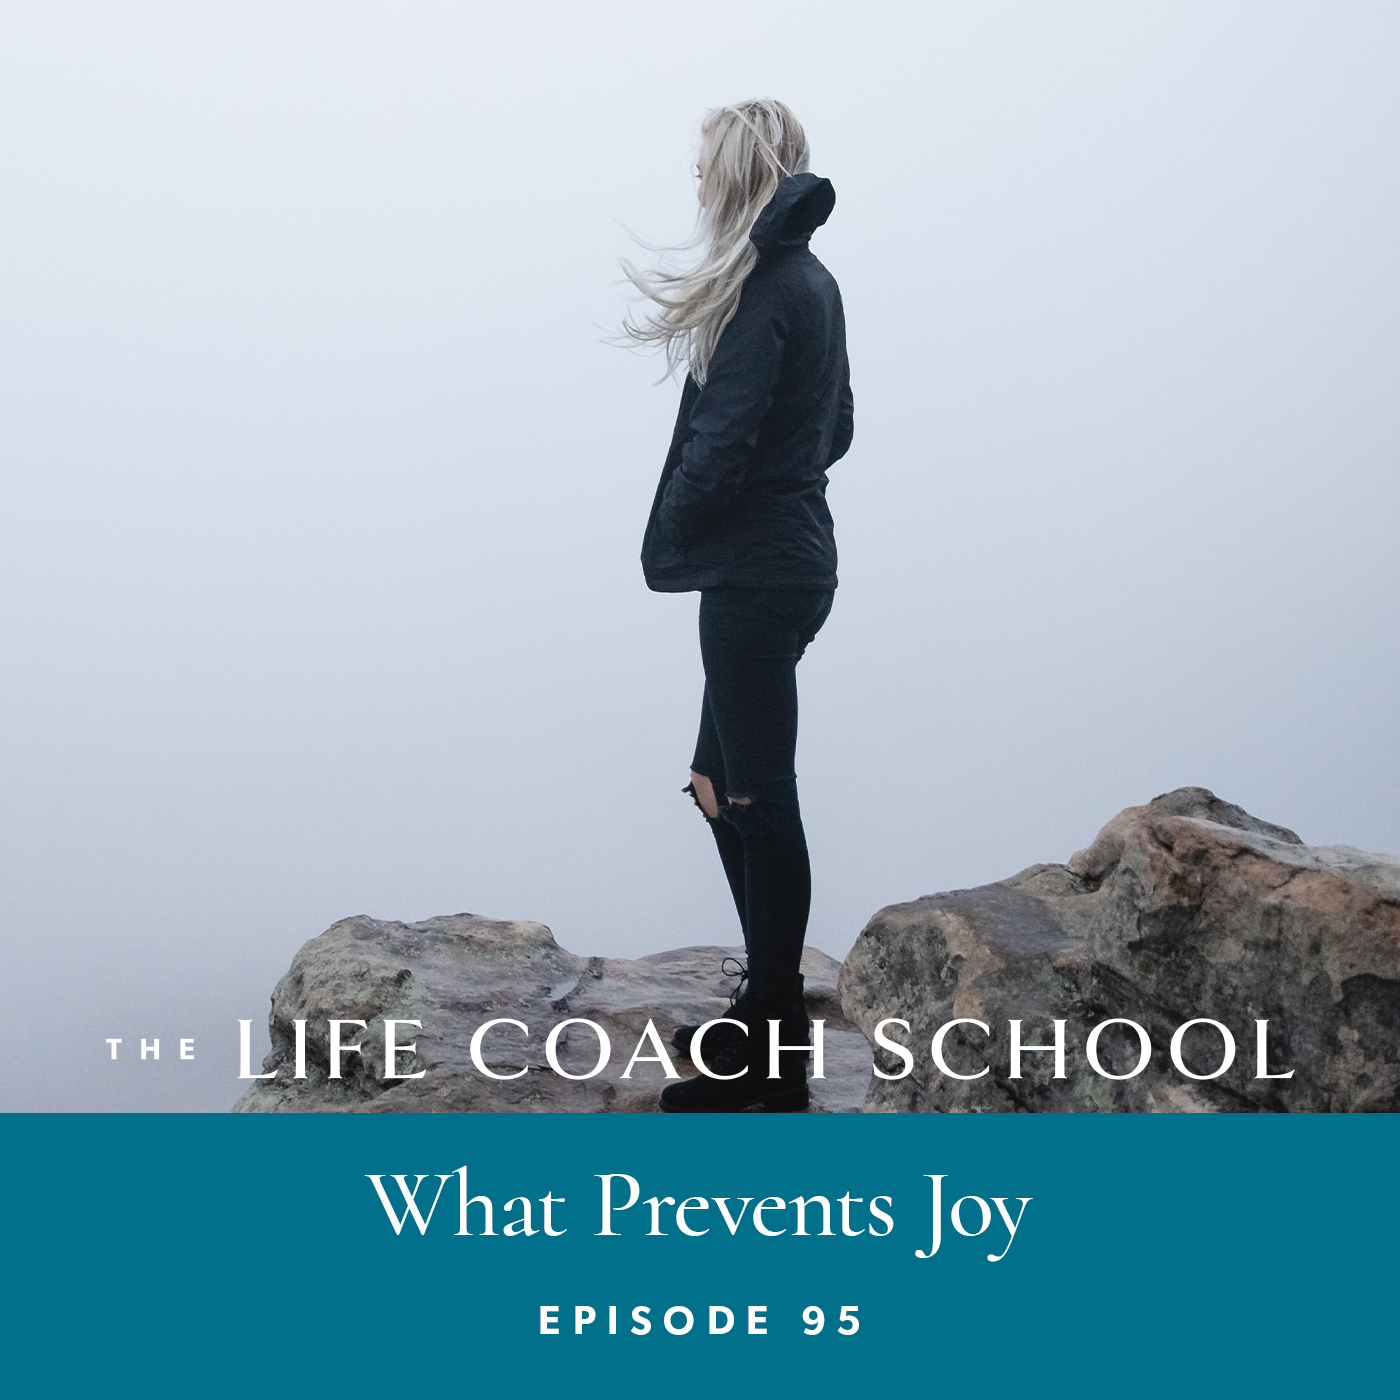 The Life Coach School Podcast with Brooke Castillo | Episode 95 | What Prevents Joy